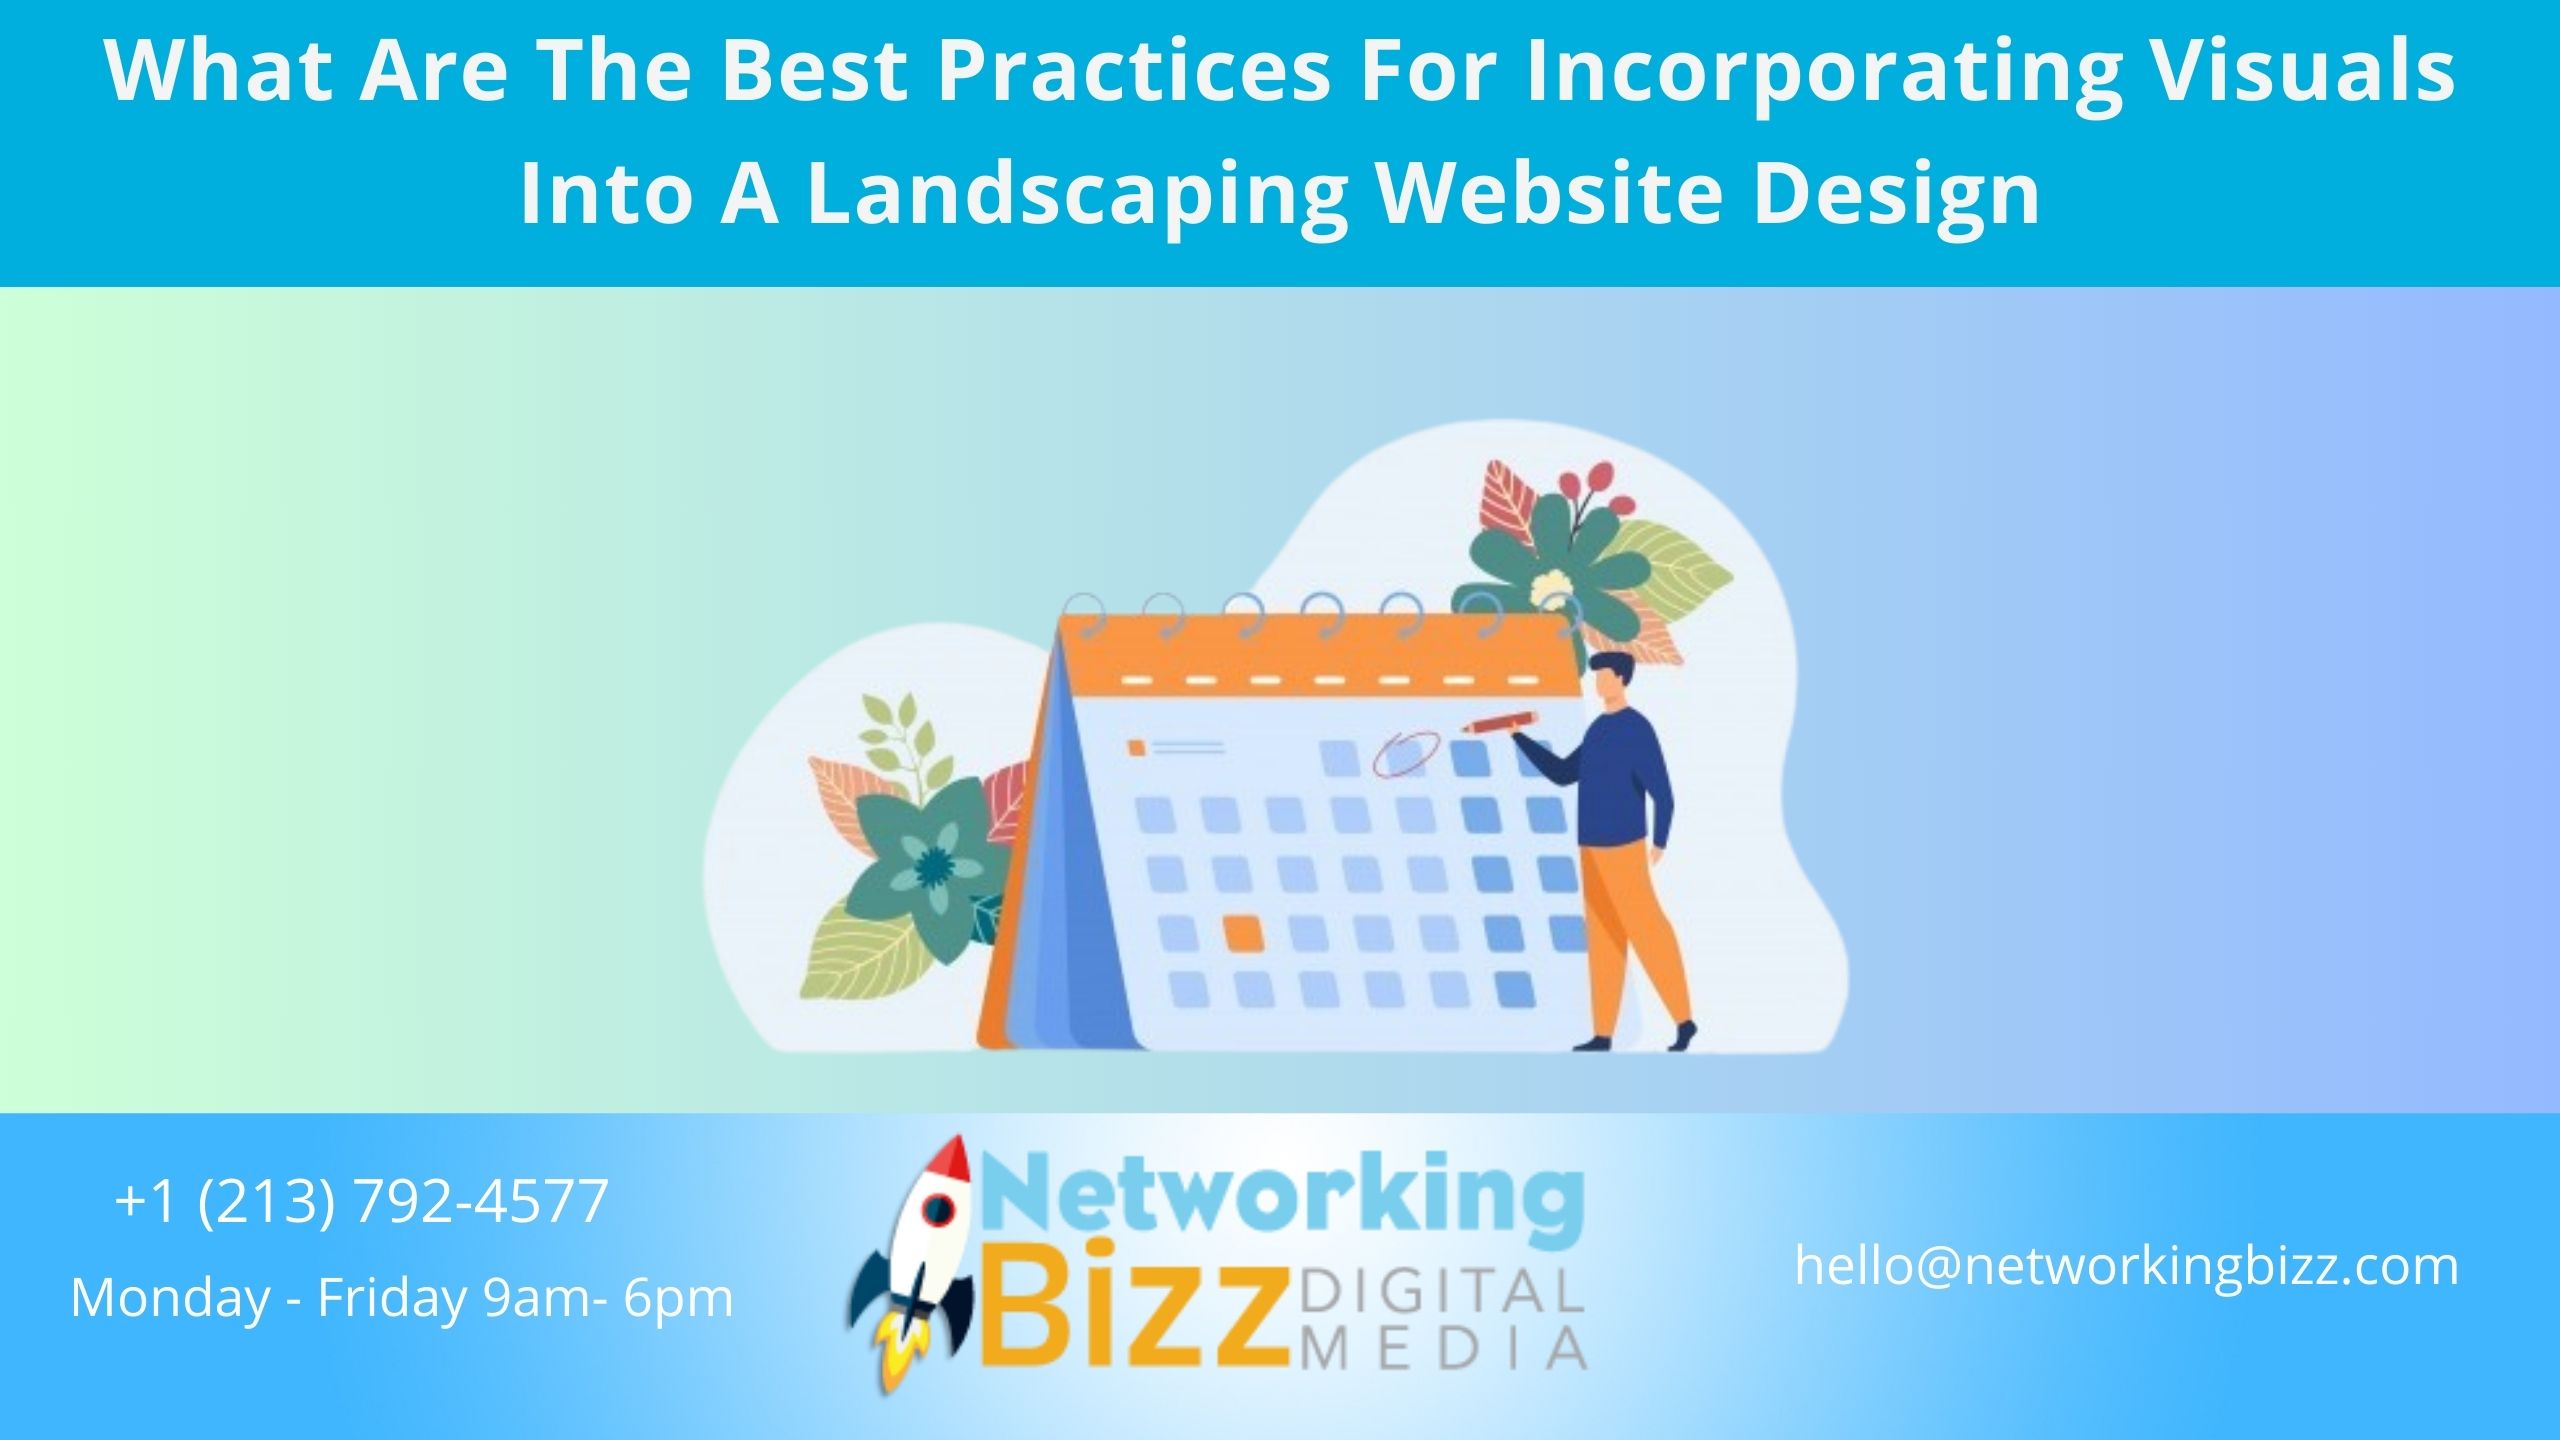 What Are The Best Practices For Incorporating Visuals Into A Landscaping Website Design